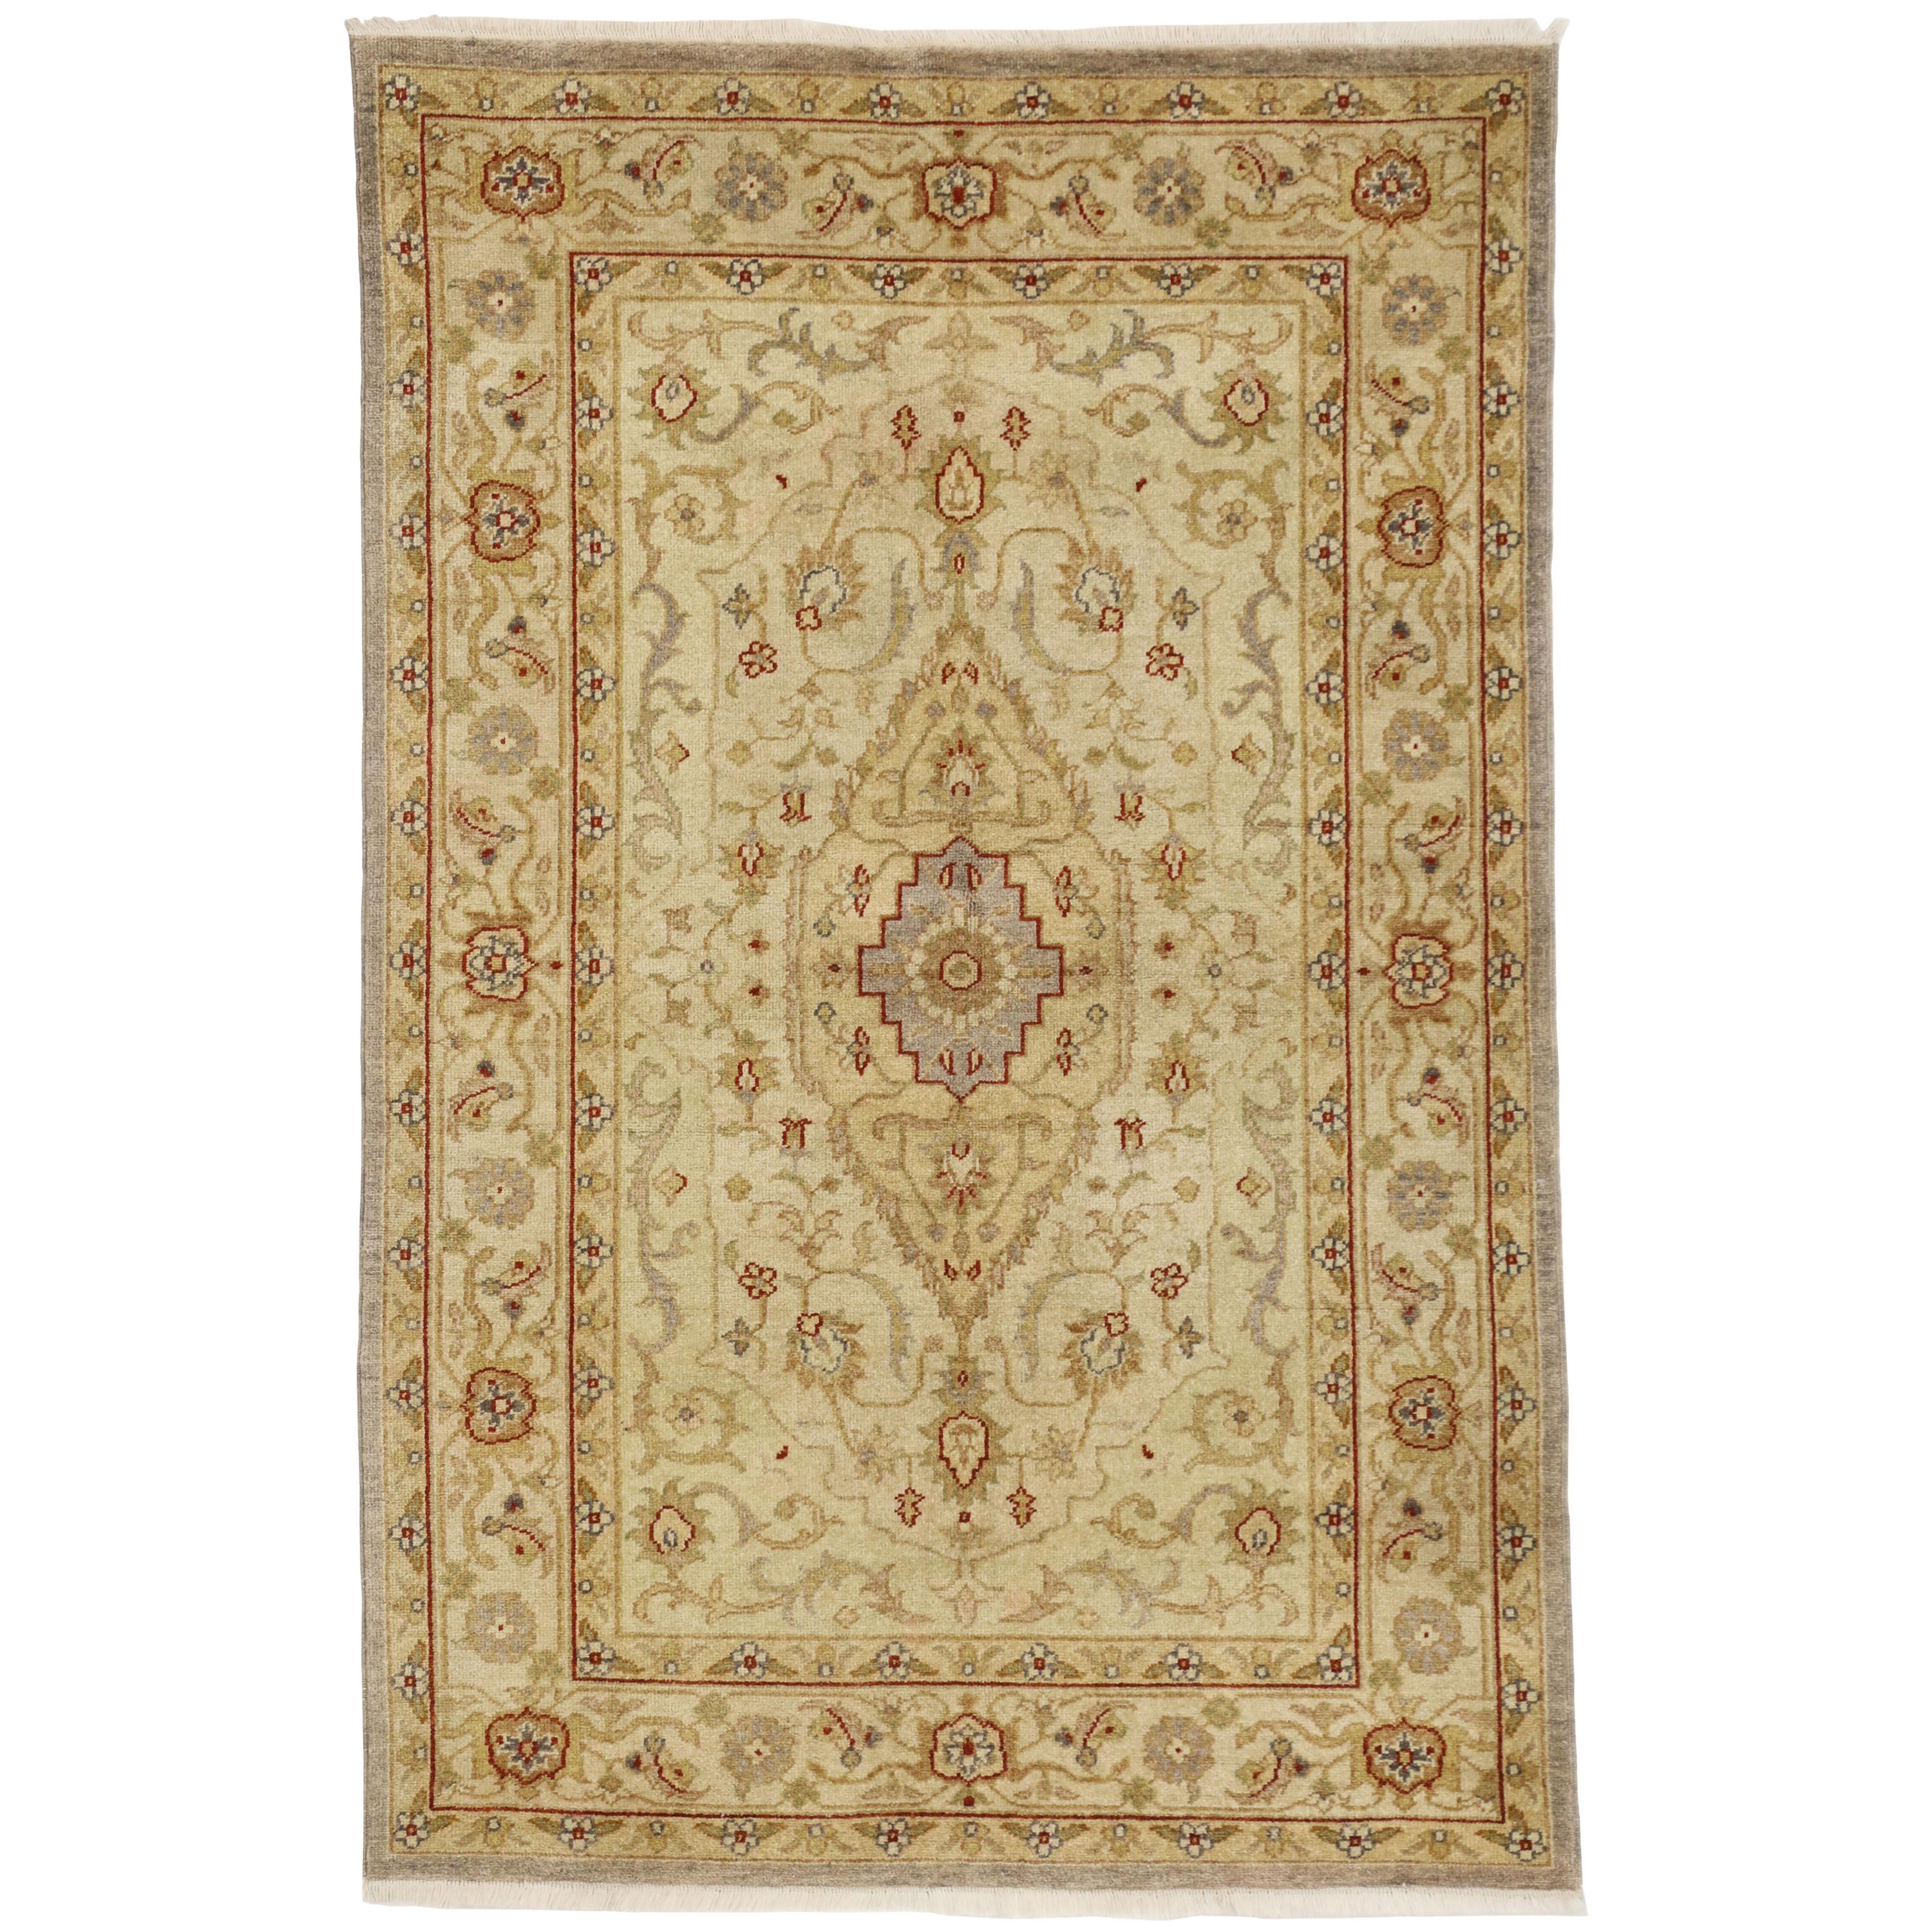 Vintage Oushak Style Rug with Traditional Design in Warm, Golden Hues For Sale